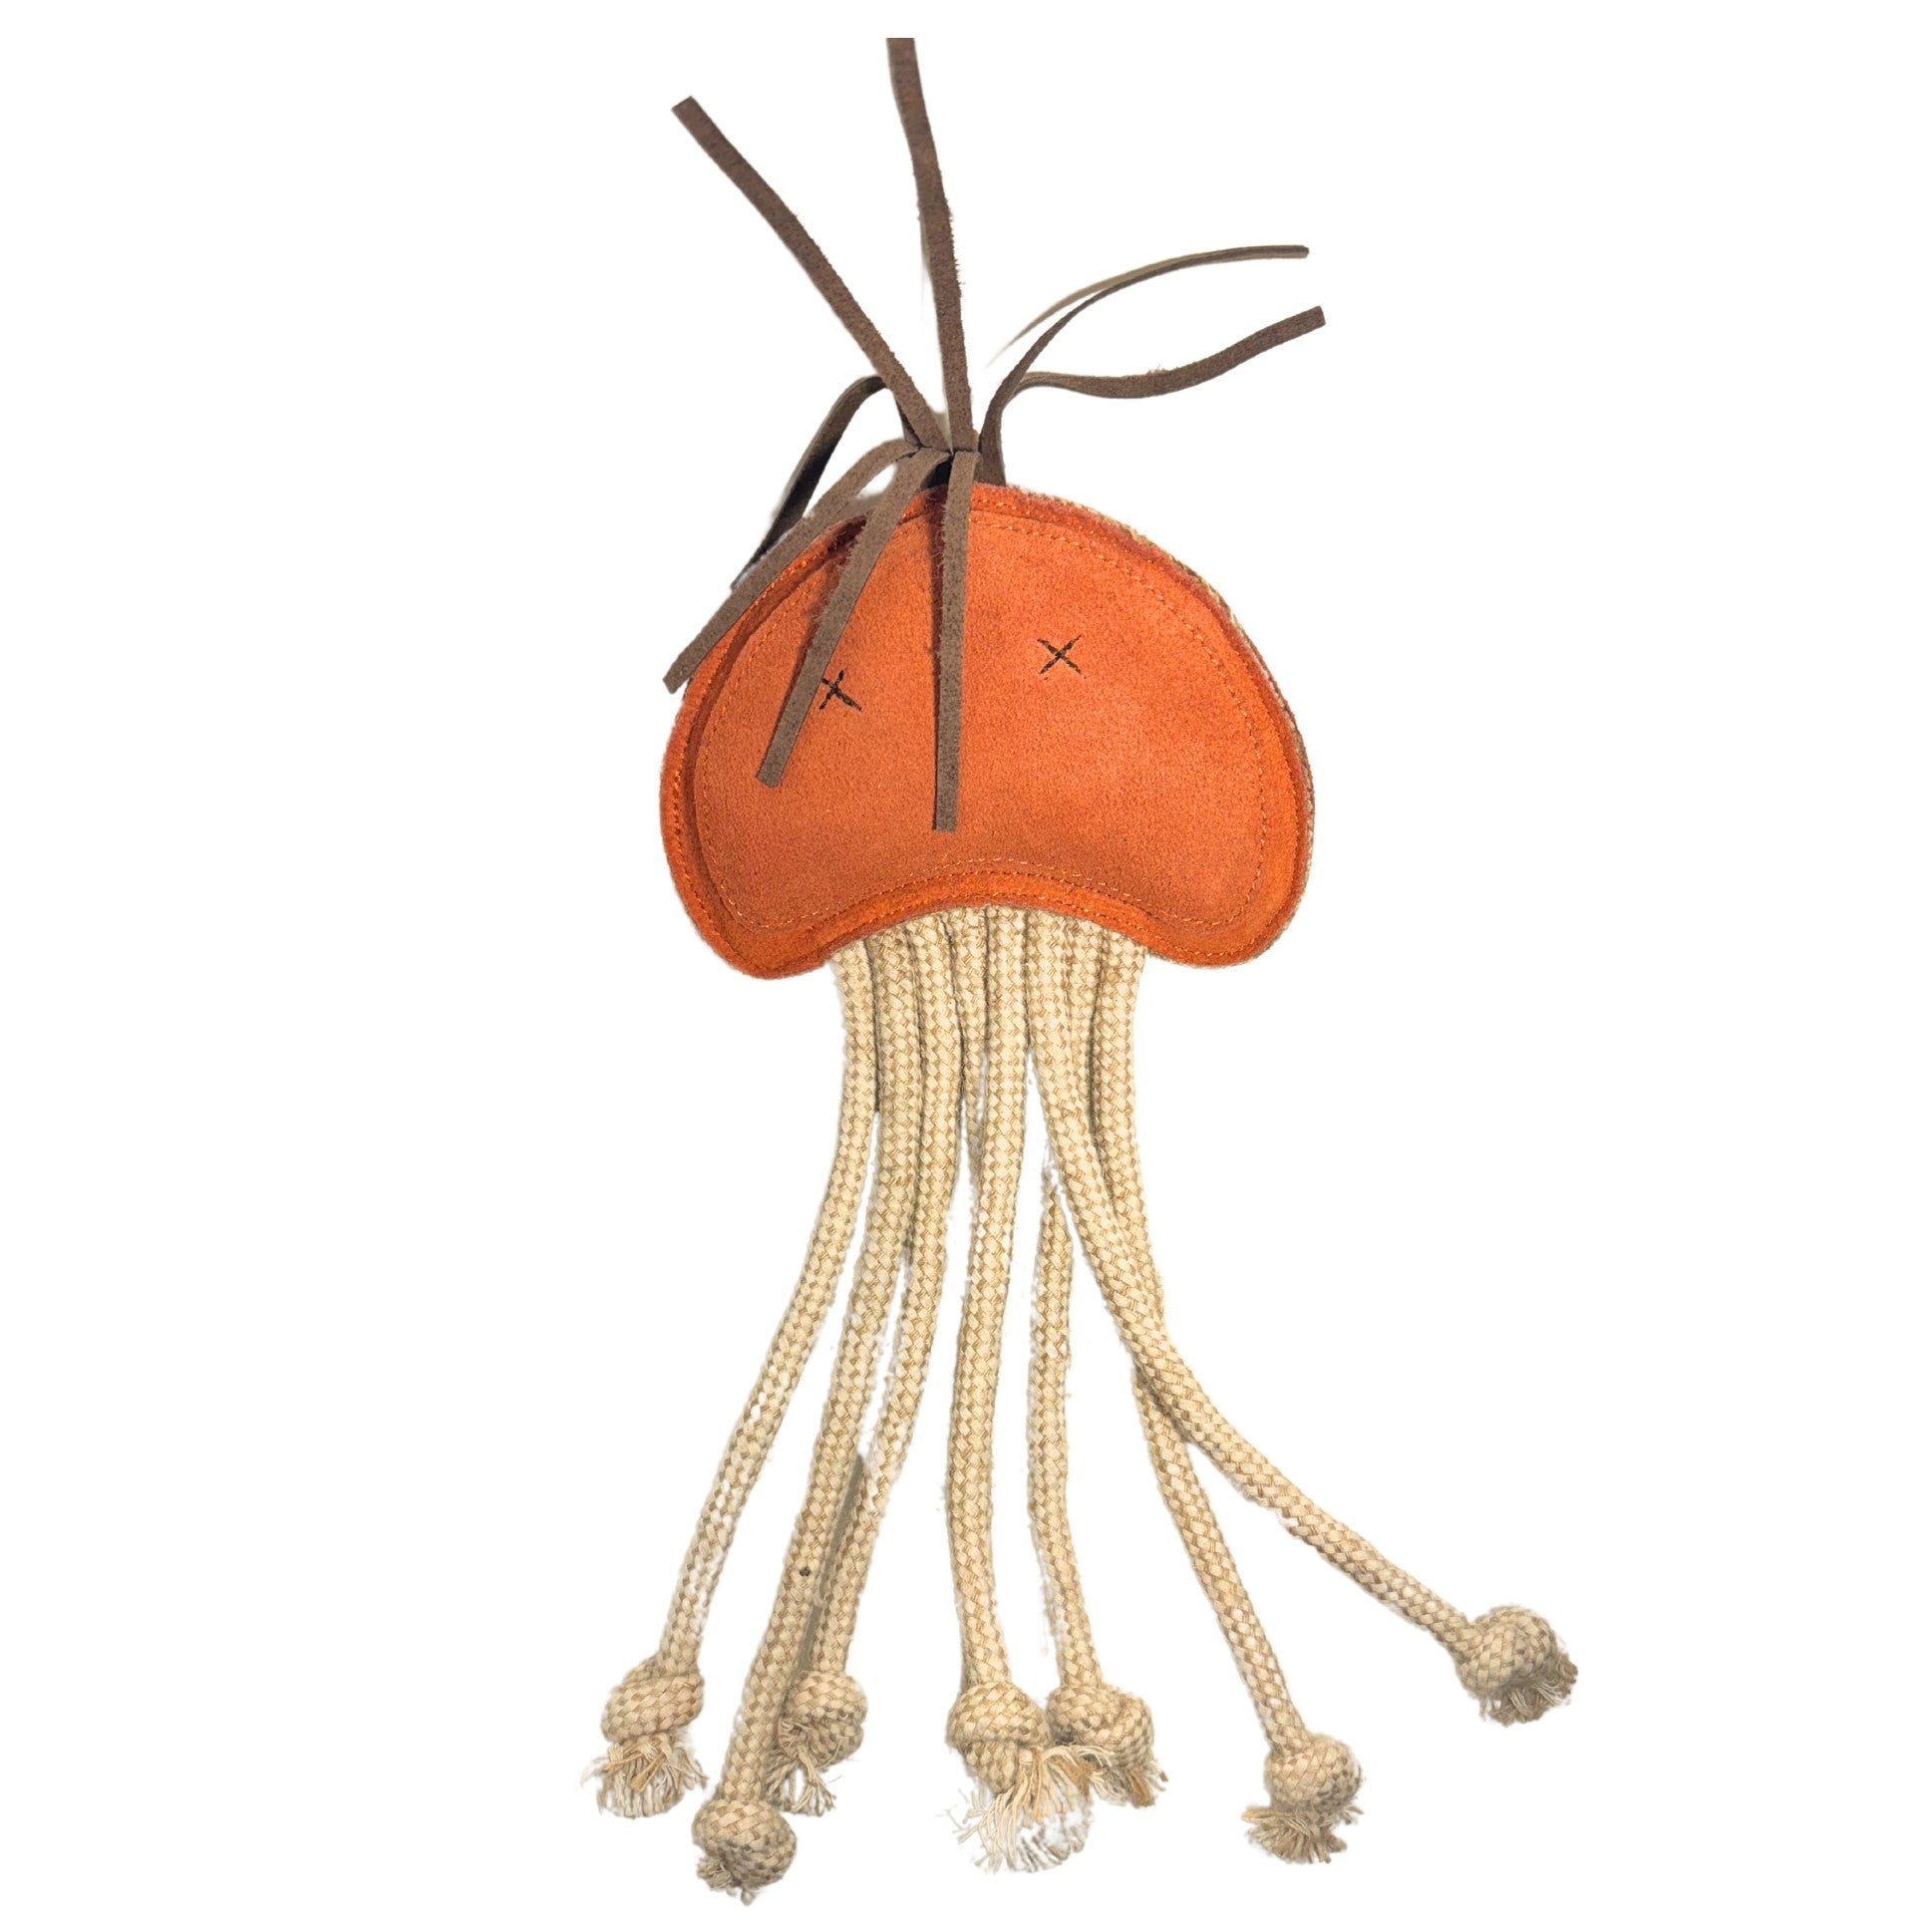 A whimsical ochre Joe Jellyfish toy made of buffalo suede and thick strings, featuring a round top with stitched x's for eyes, and long tentacles with knotted ends. The creature appears soft and tactile, suitable for play. Designed by Georgie Paws.